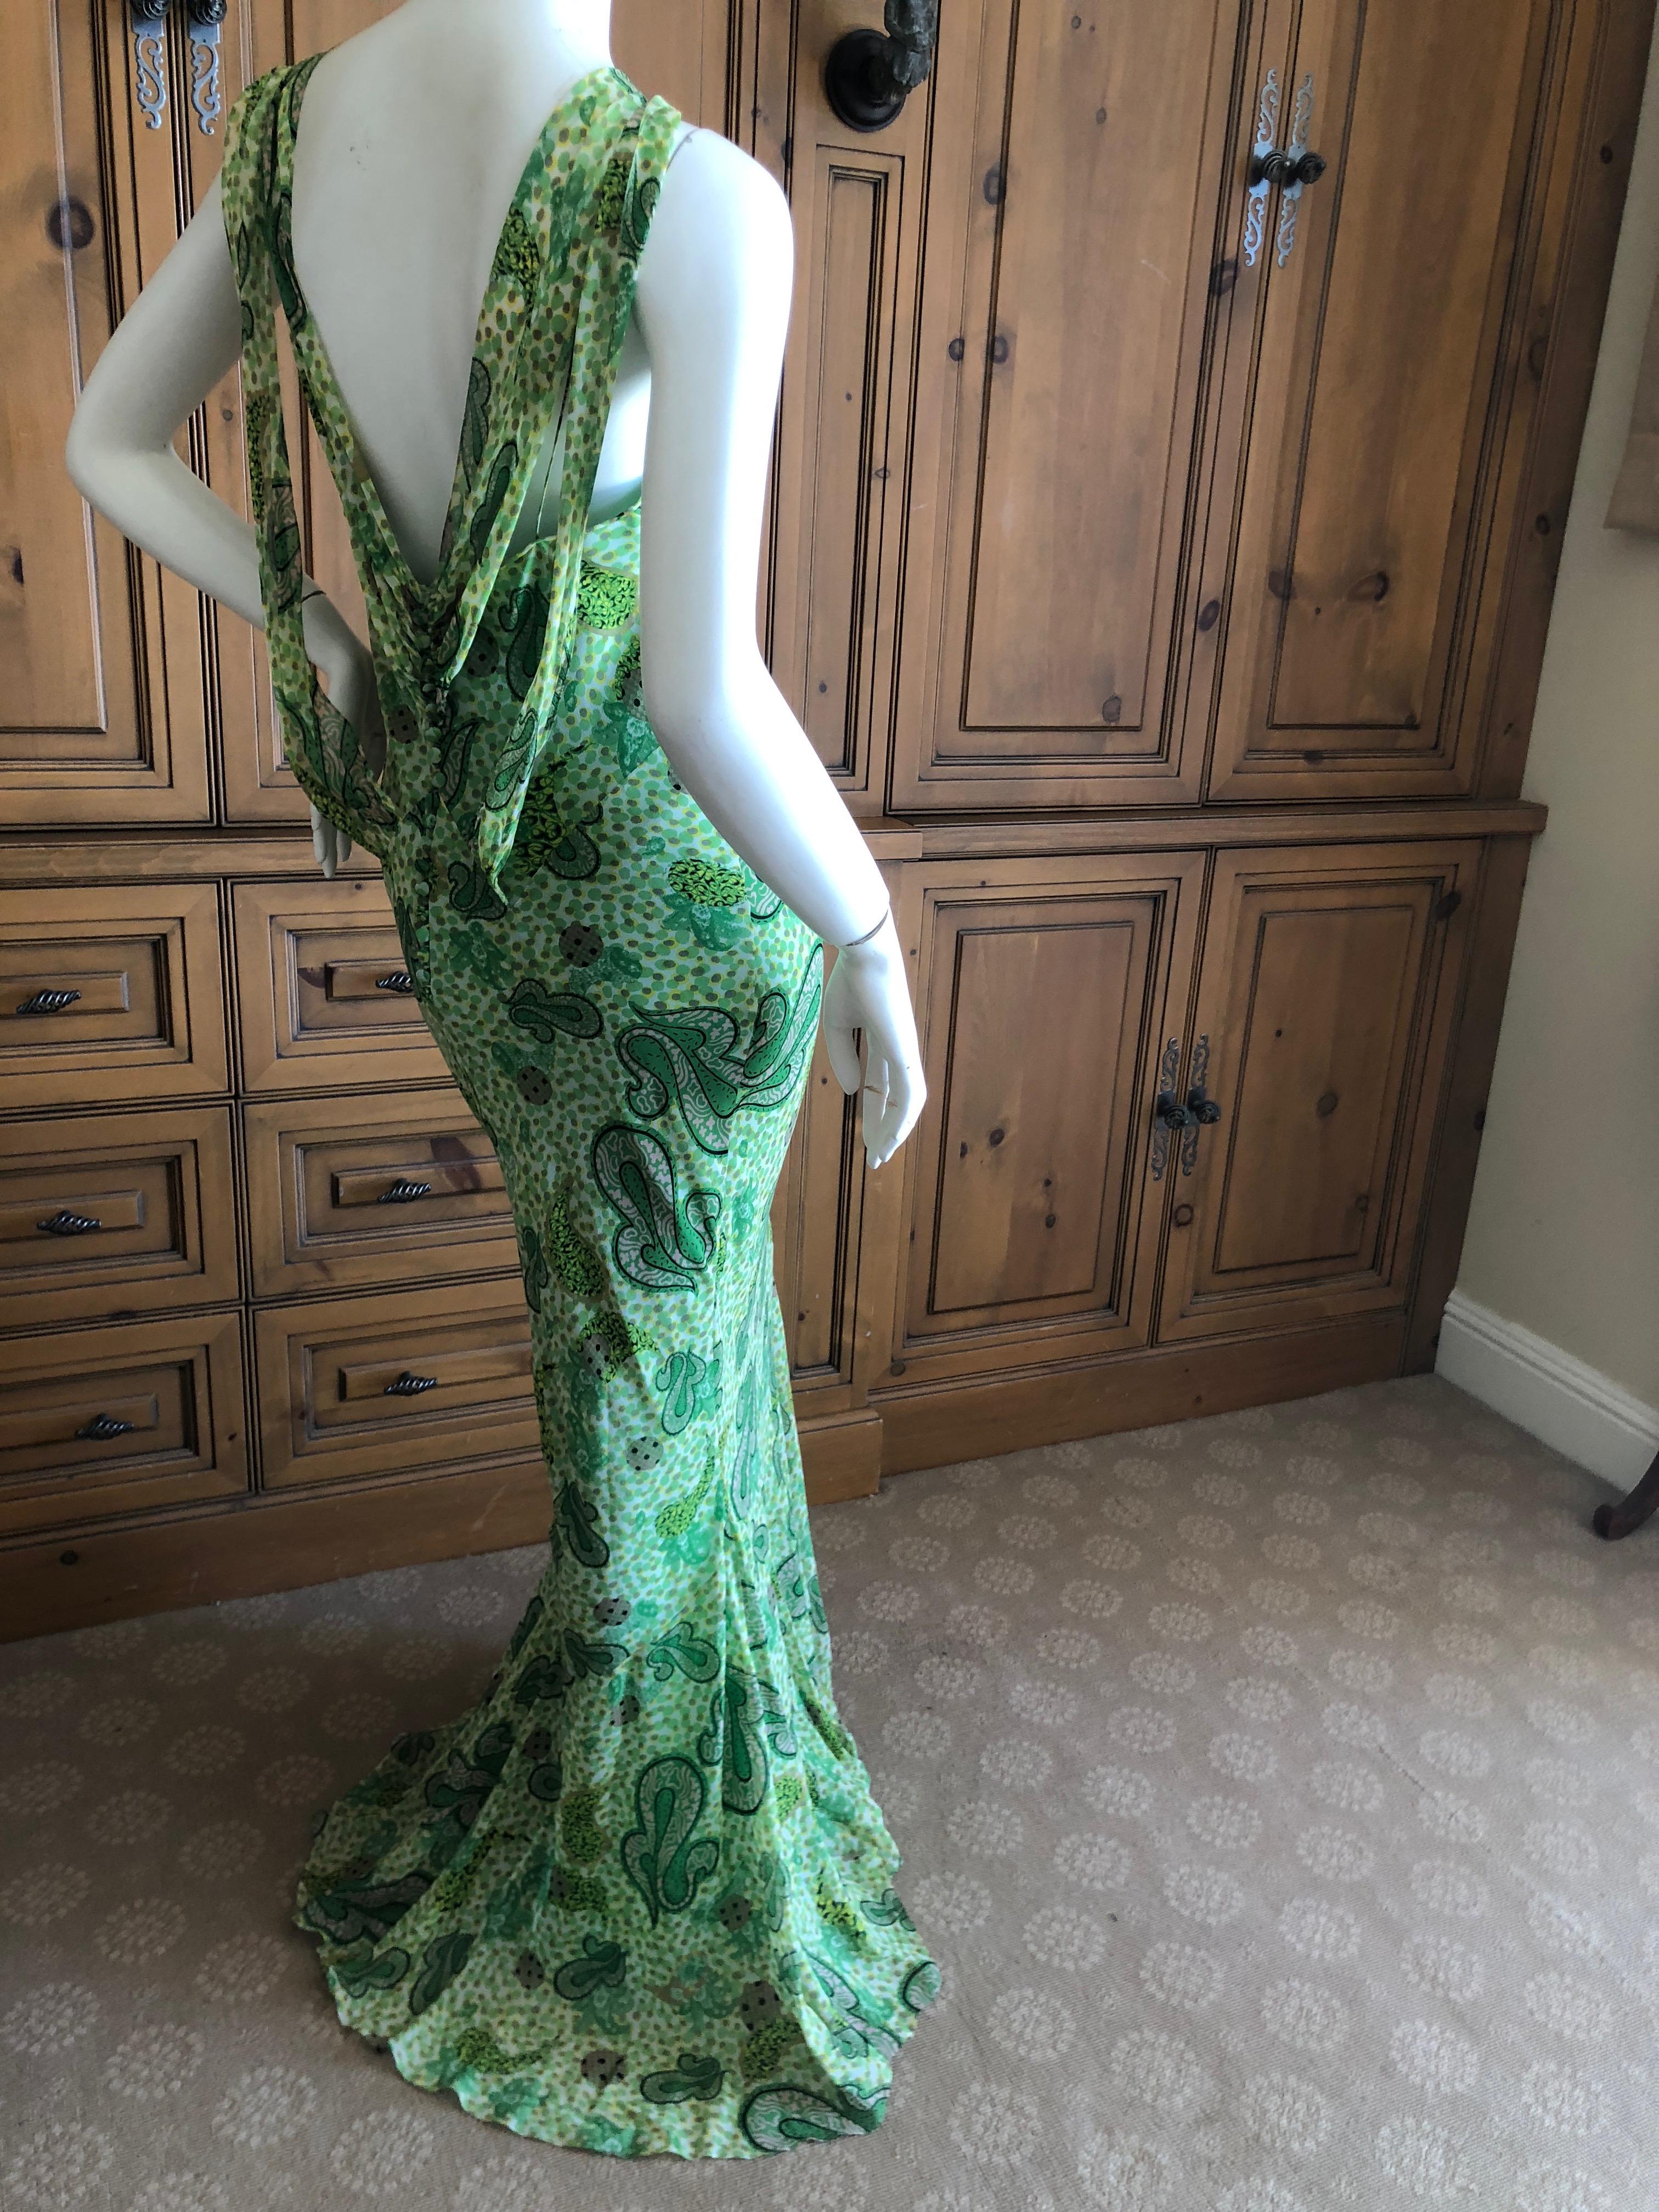  John Galliano 2002 Green Silk Paisley Ruffled Evening Dress with Low Cowl Back For Sale 4